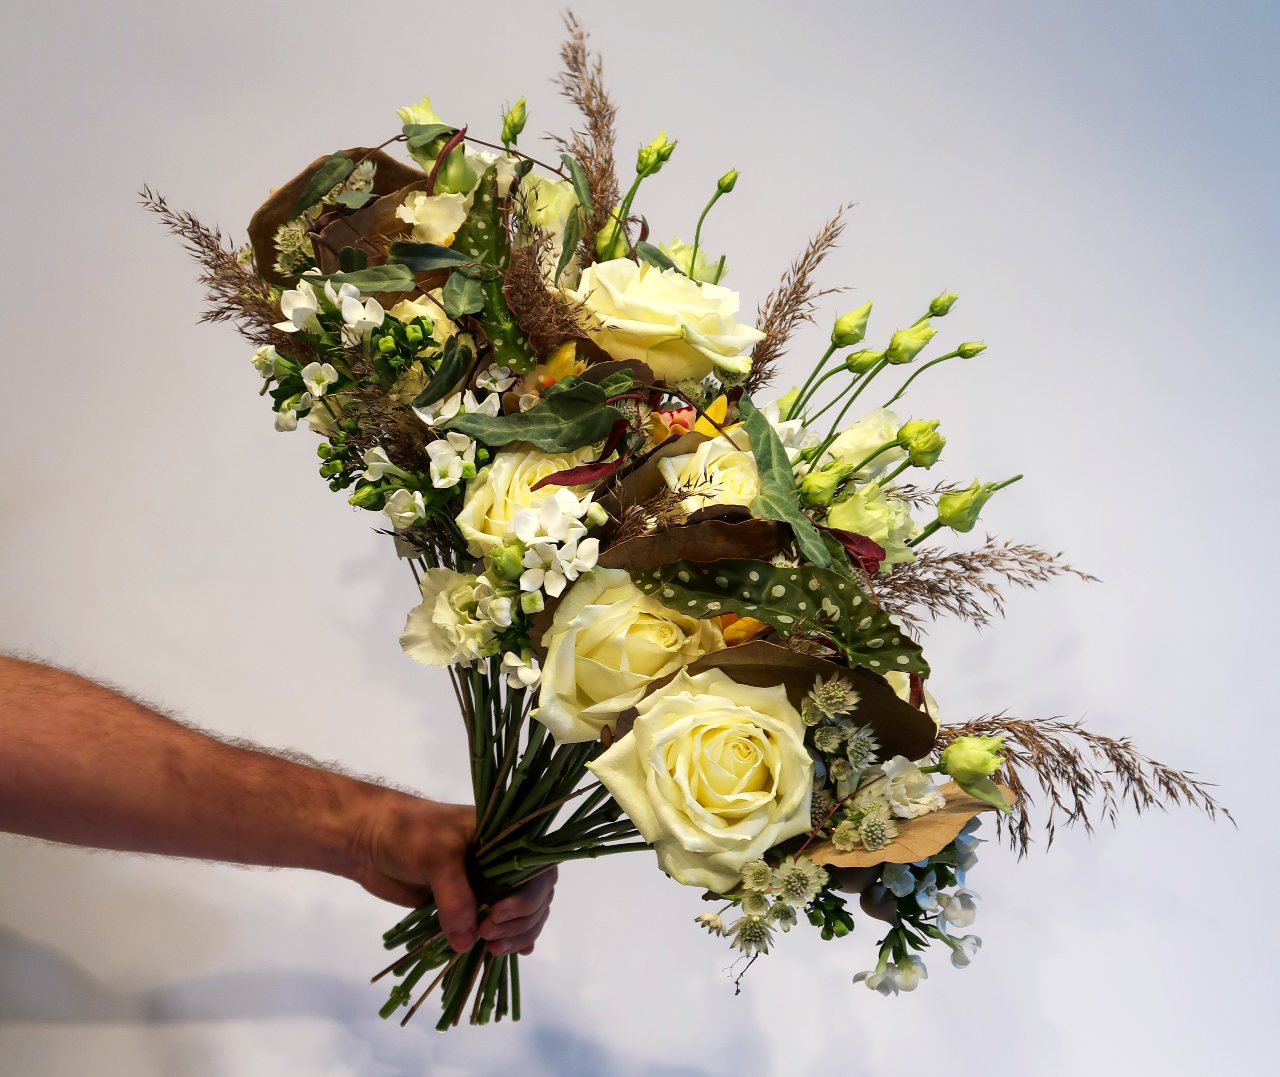 Jimmy’s Floral Art finesse with Porta Nova roses